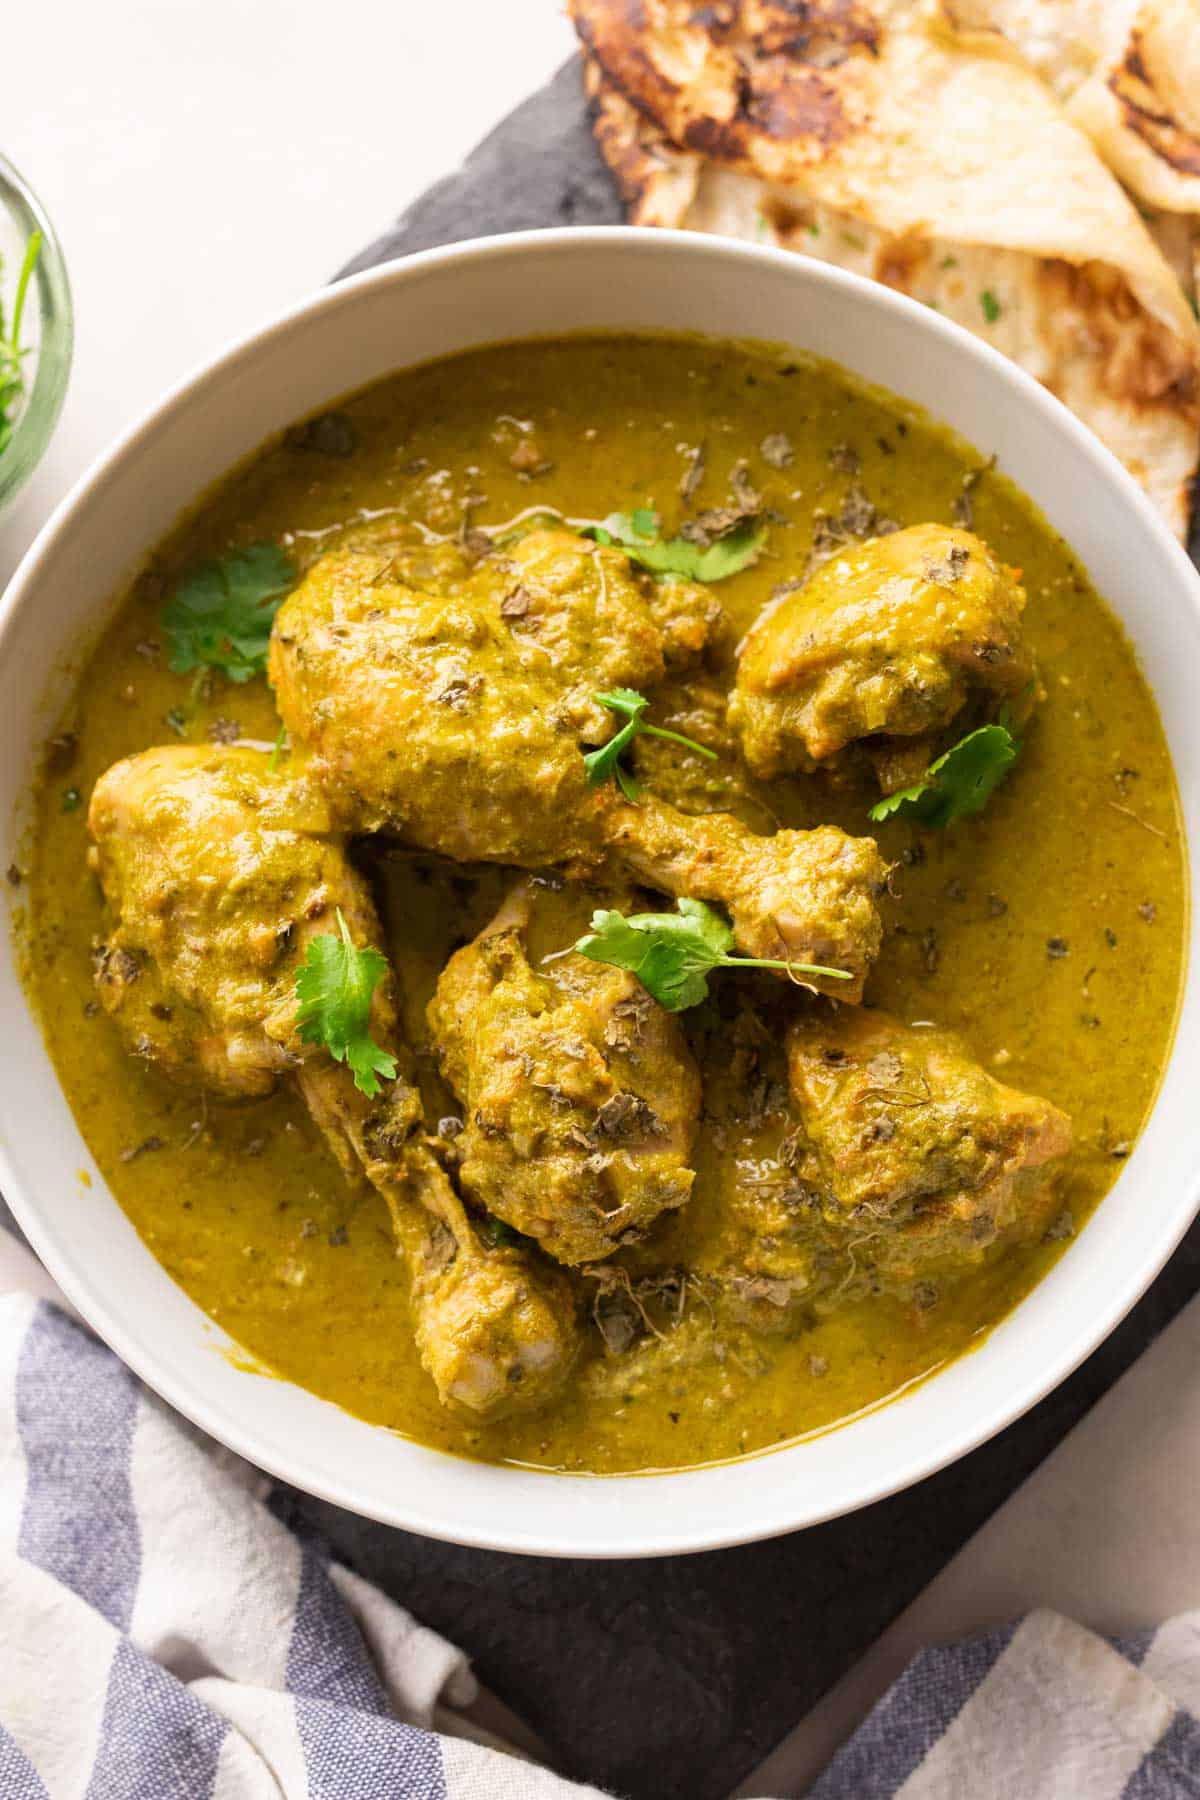 Picture of saag chicken served in a white bowl with naan on the side